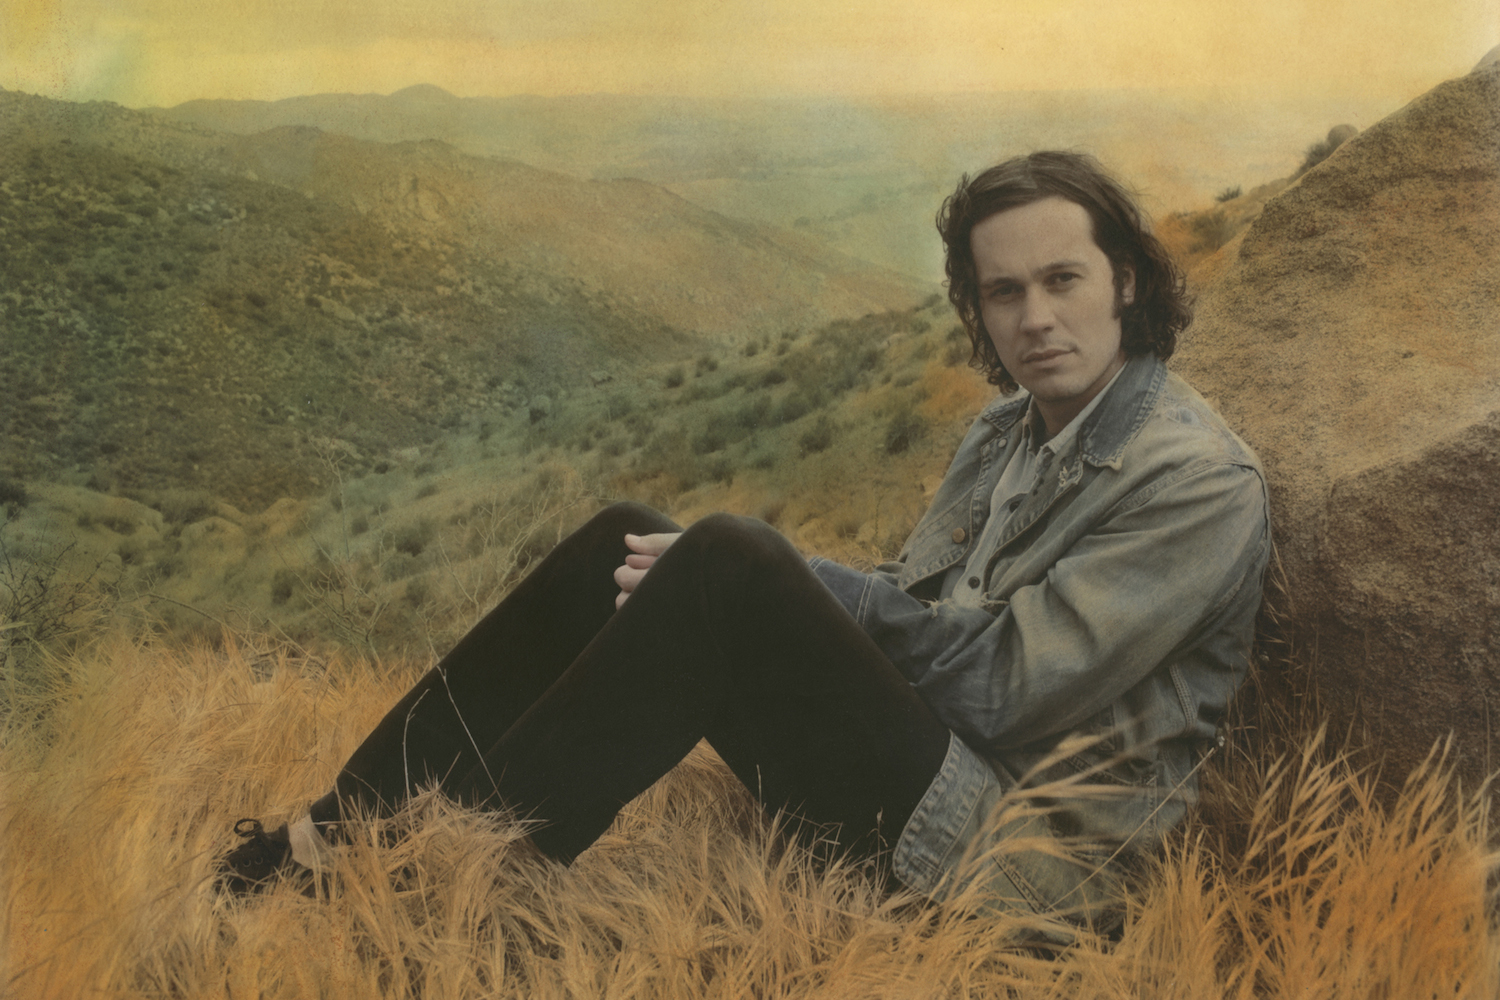 Washed Out Makes Vibrant Return With Summery New Track “Get Lost”